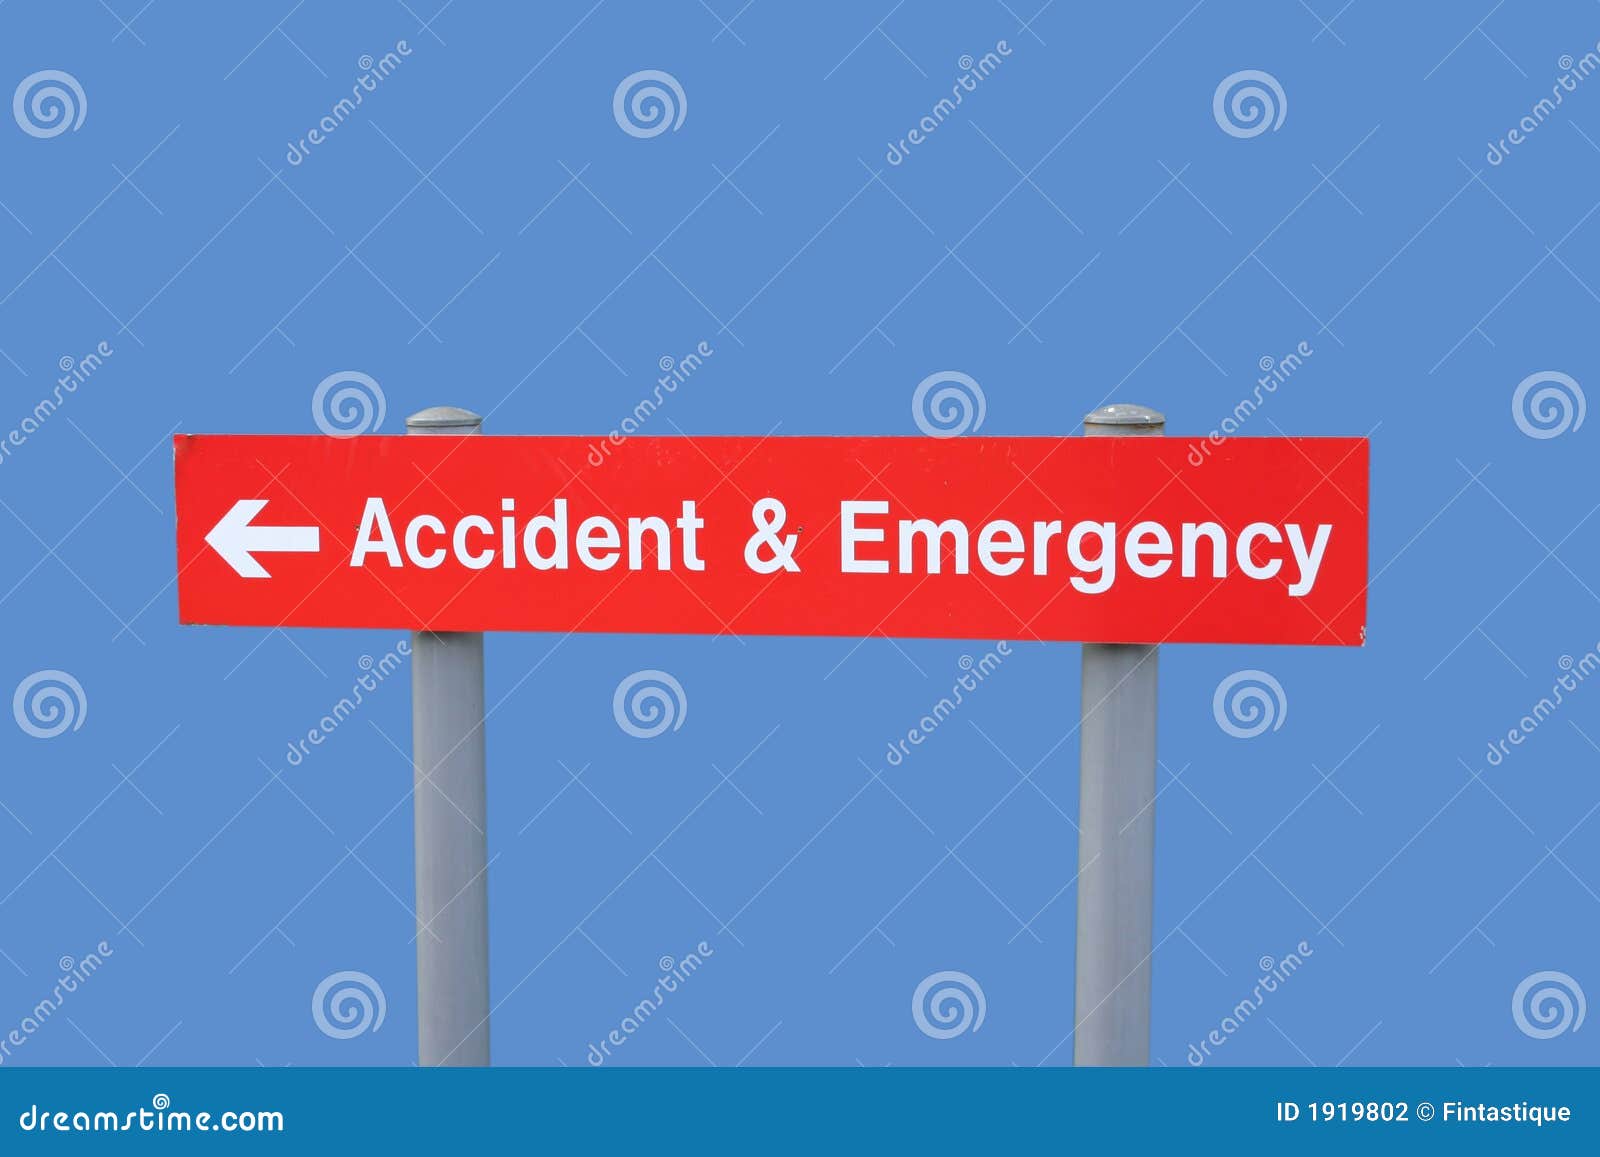 emergency room clipart images - photo #43